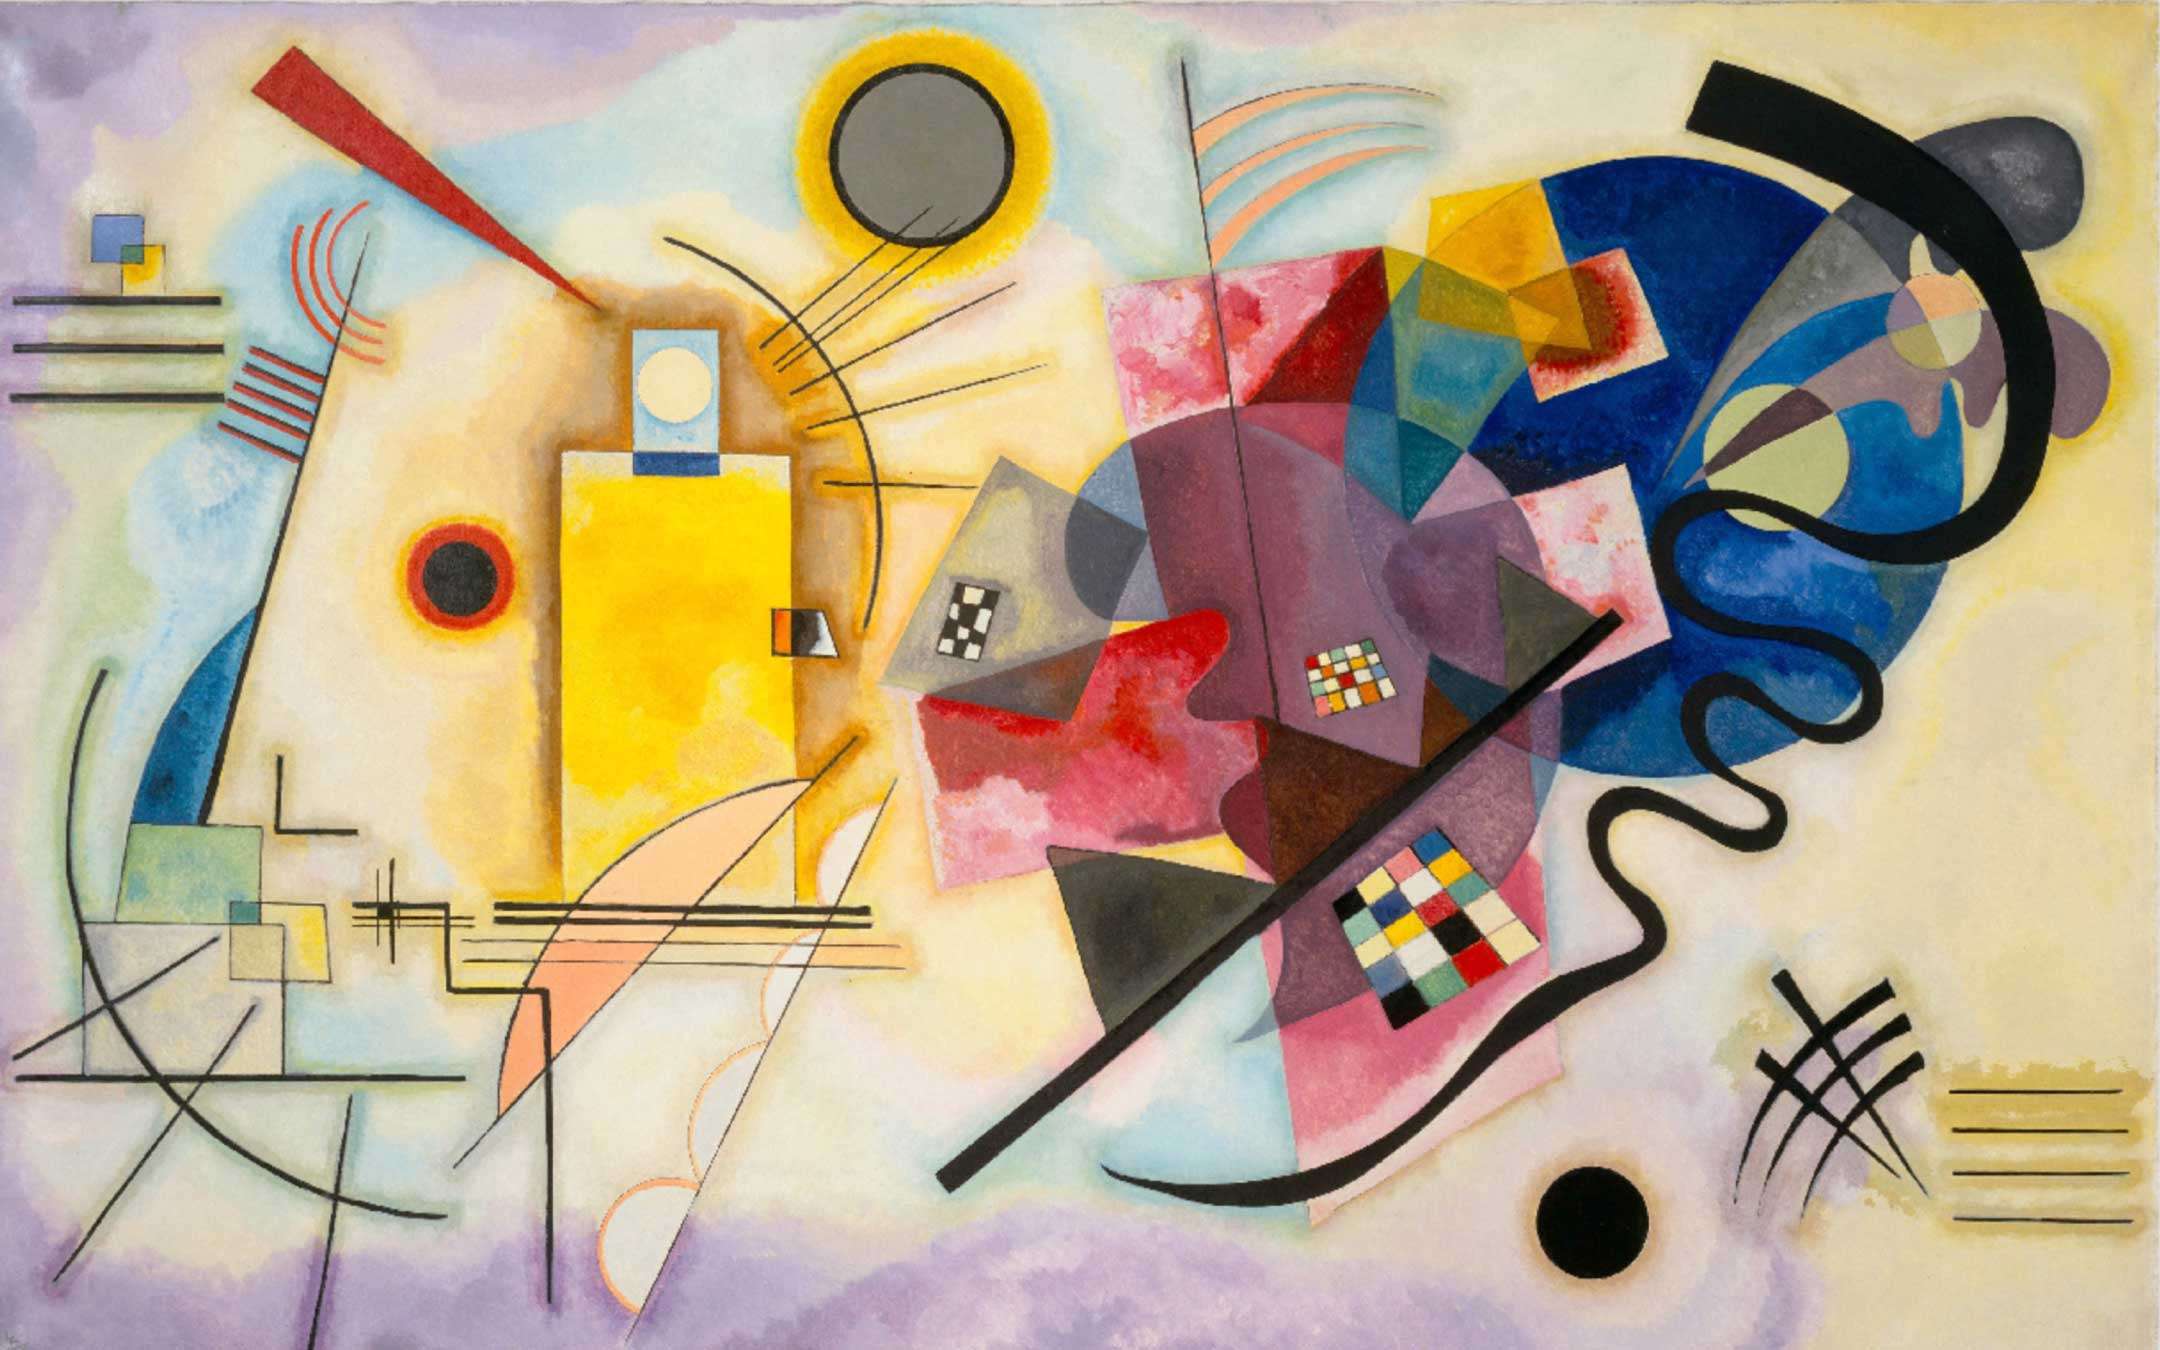 Kandinsky's art between synaesthesia and machine learning